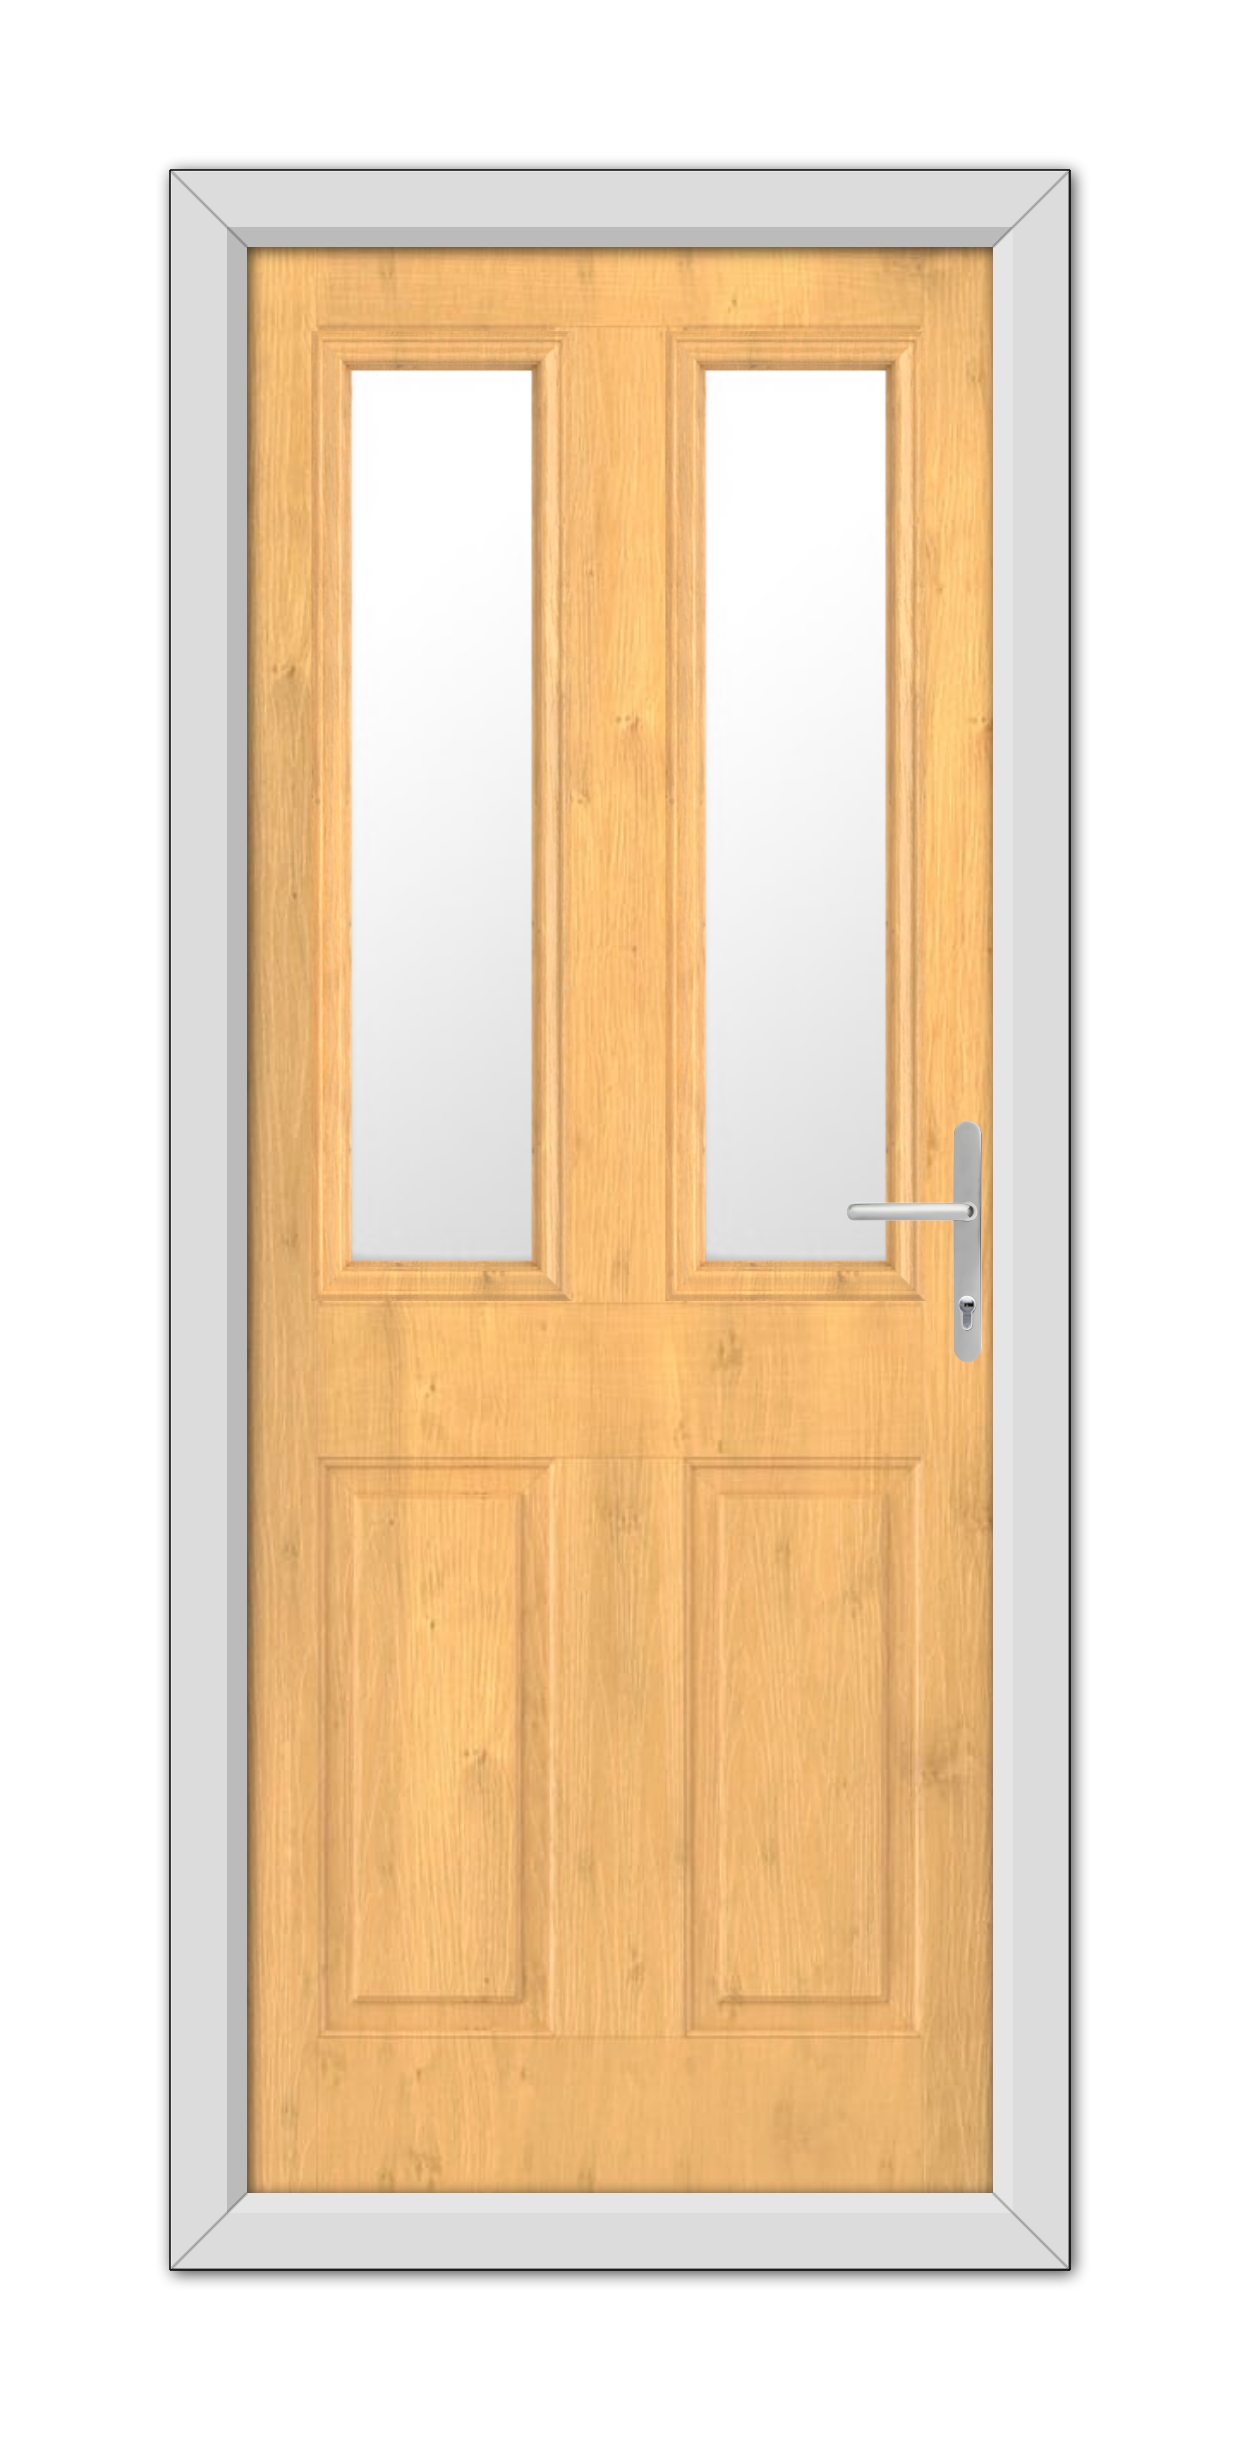 An Irish Oak Whitmore Composite Door 48mm Timber Core with glass panels and a metal handle, set within a gray frame.